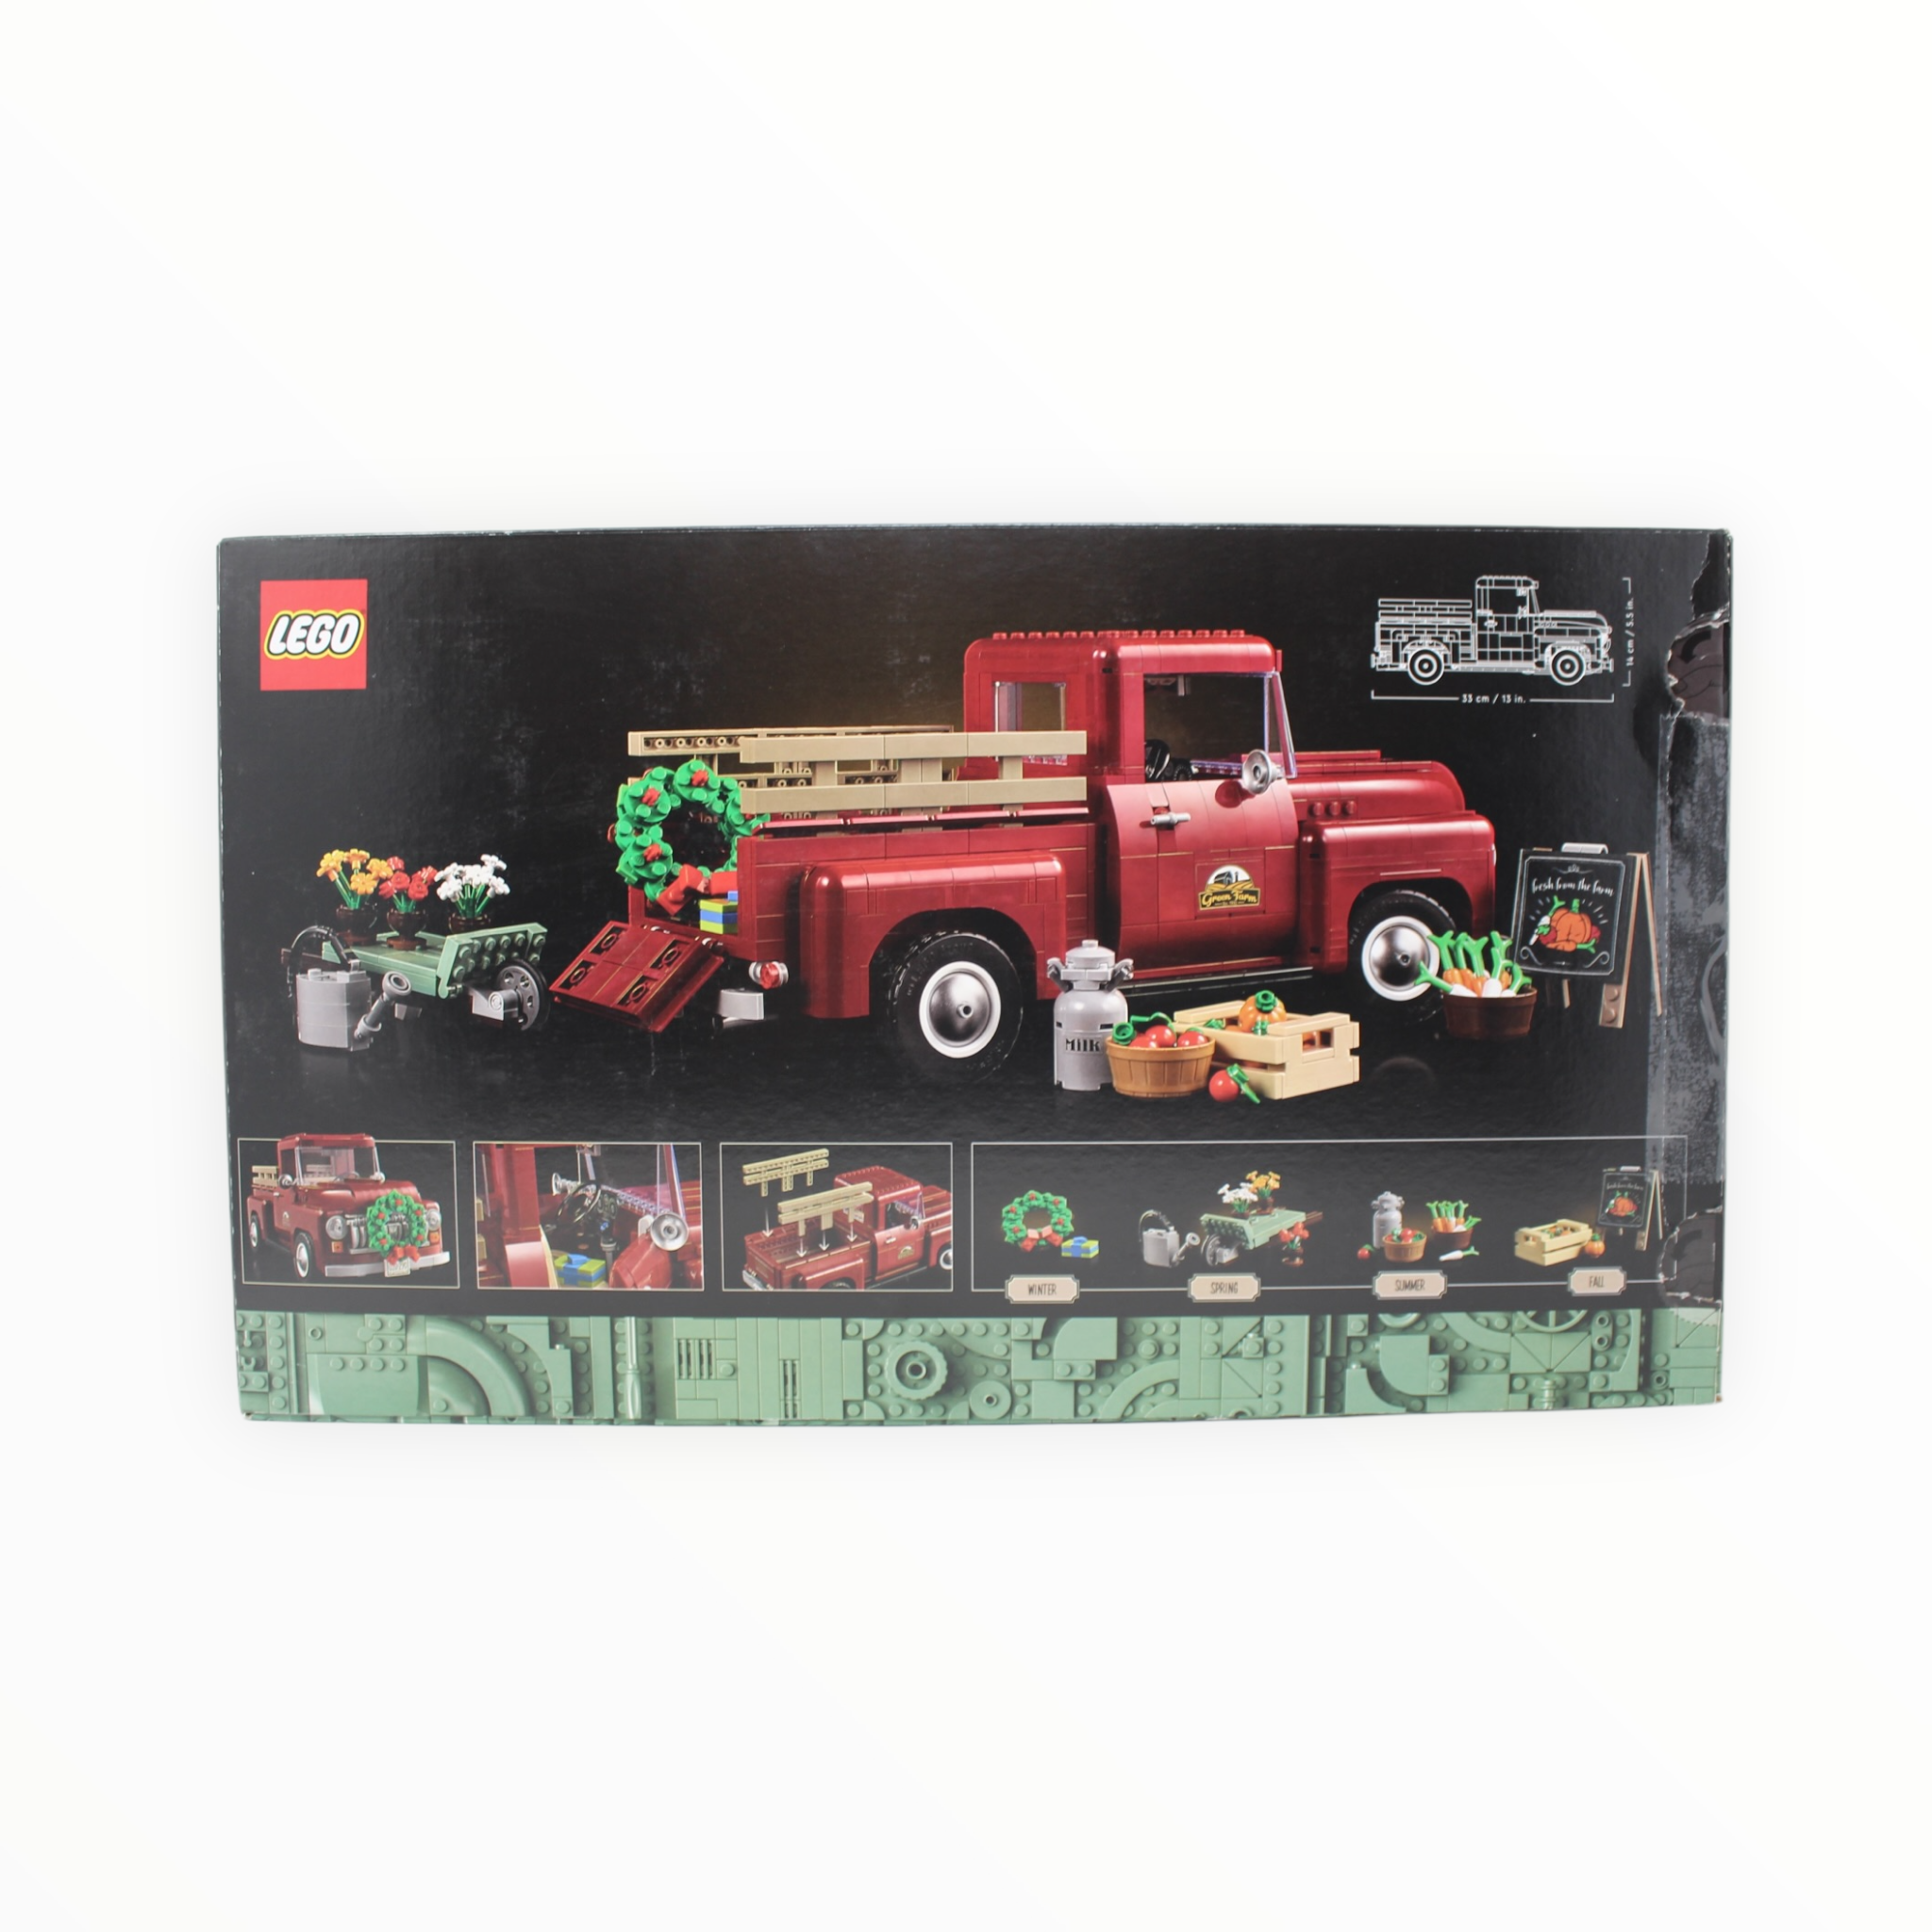 Certified Used Set 10290 LEGO Icons Pickup Truck